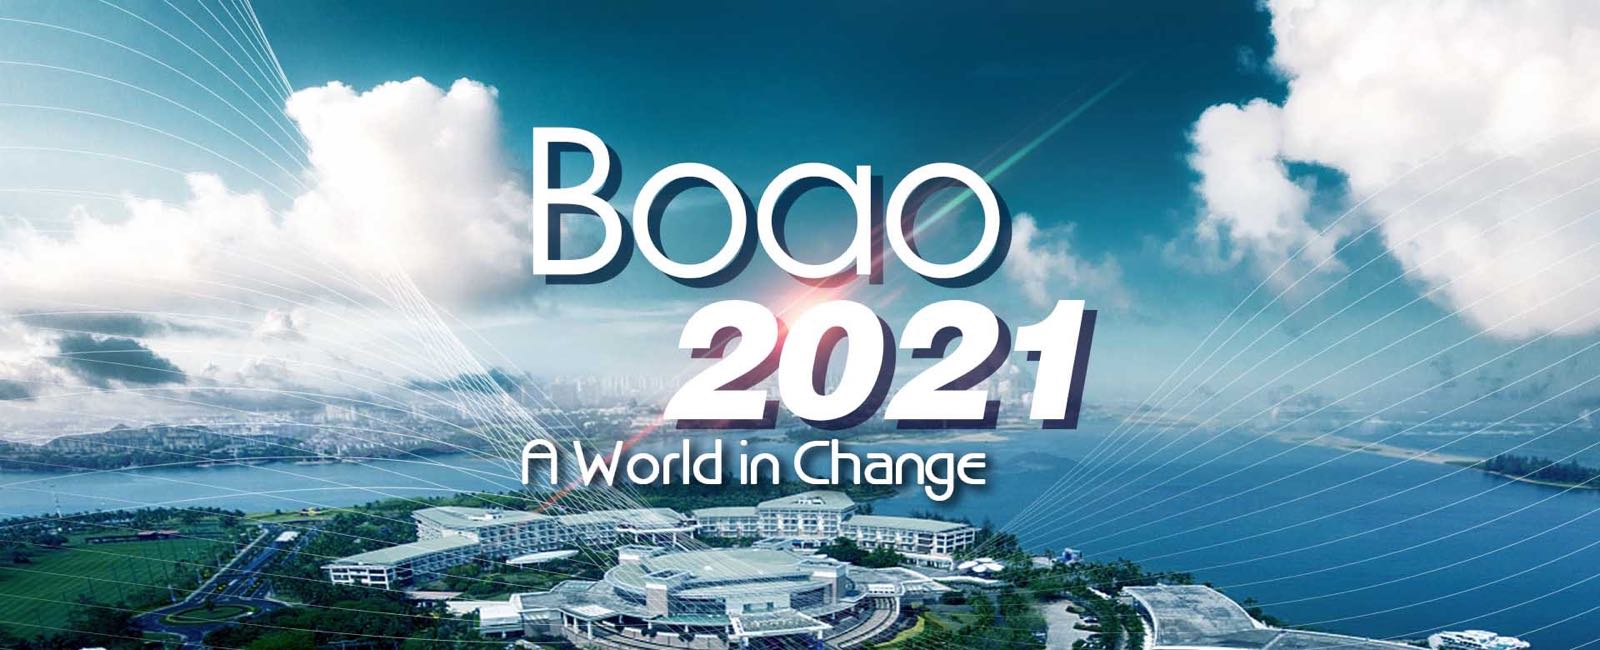 Boao 2021：A World in Change